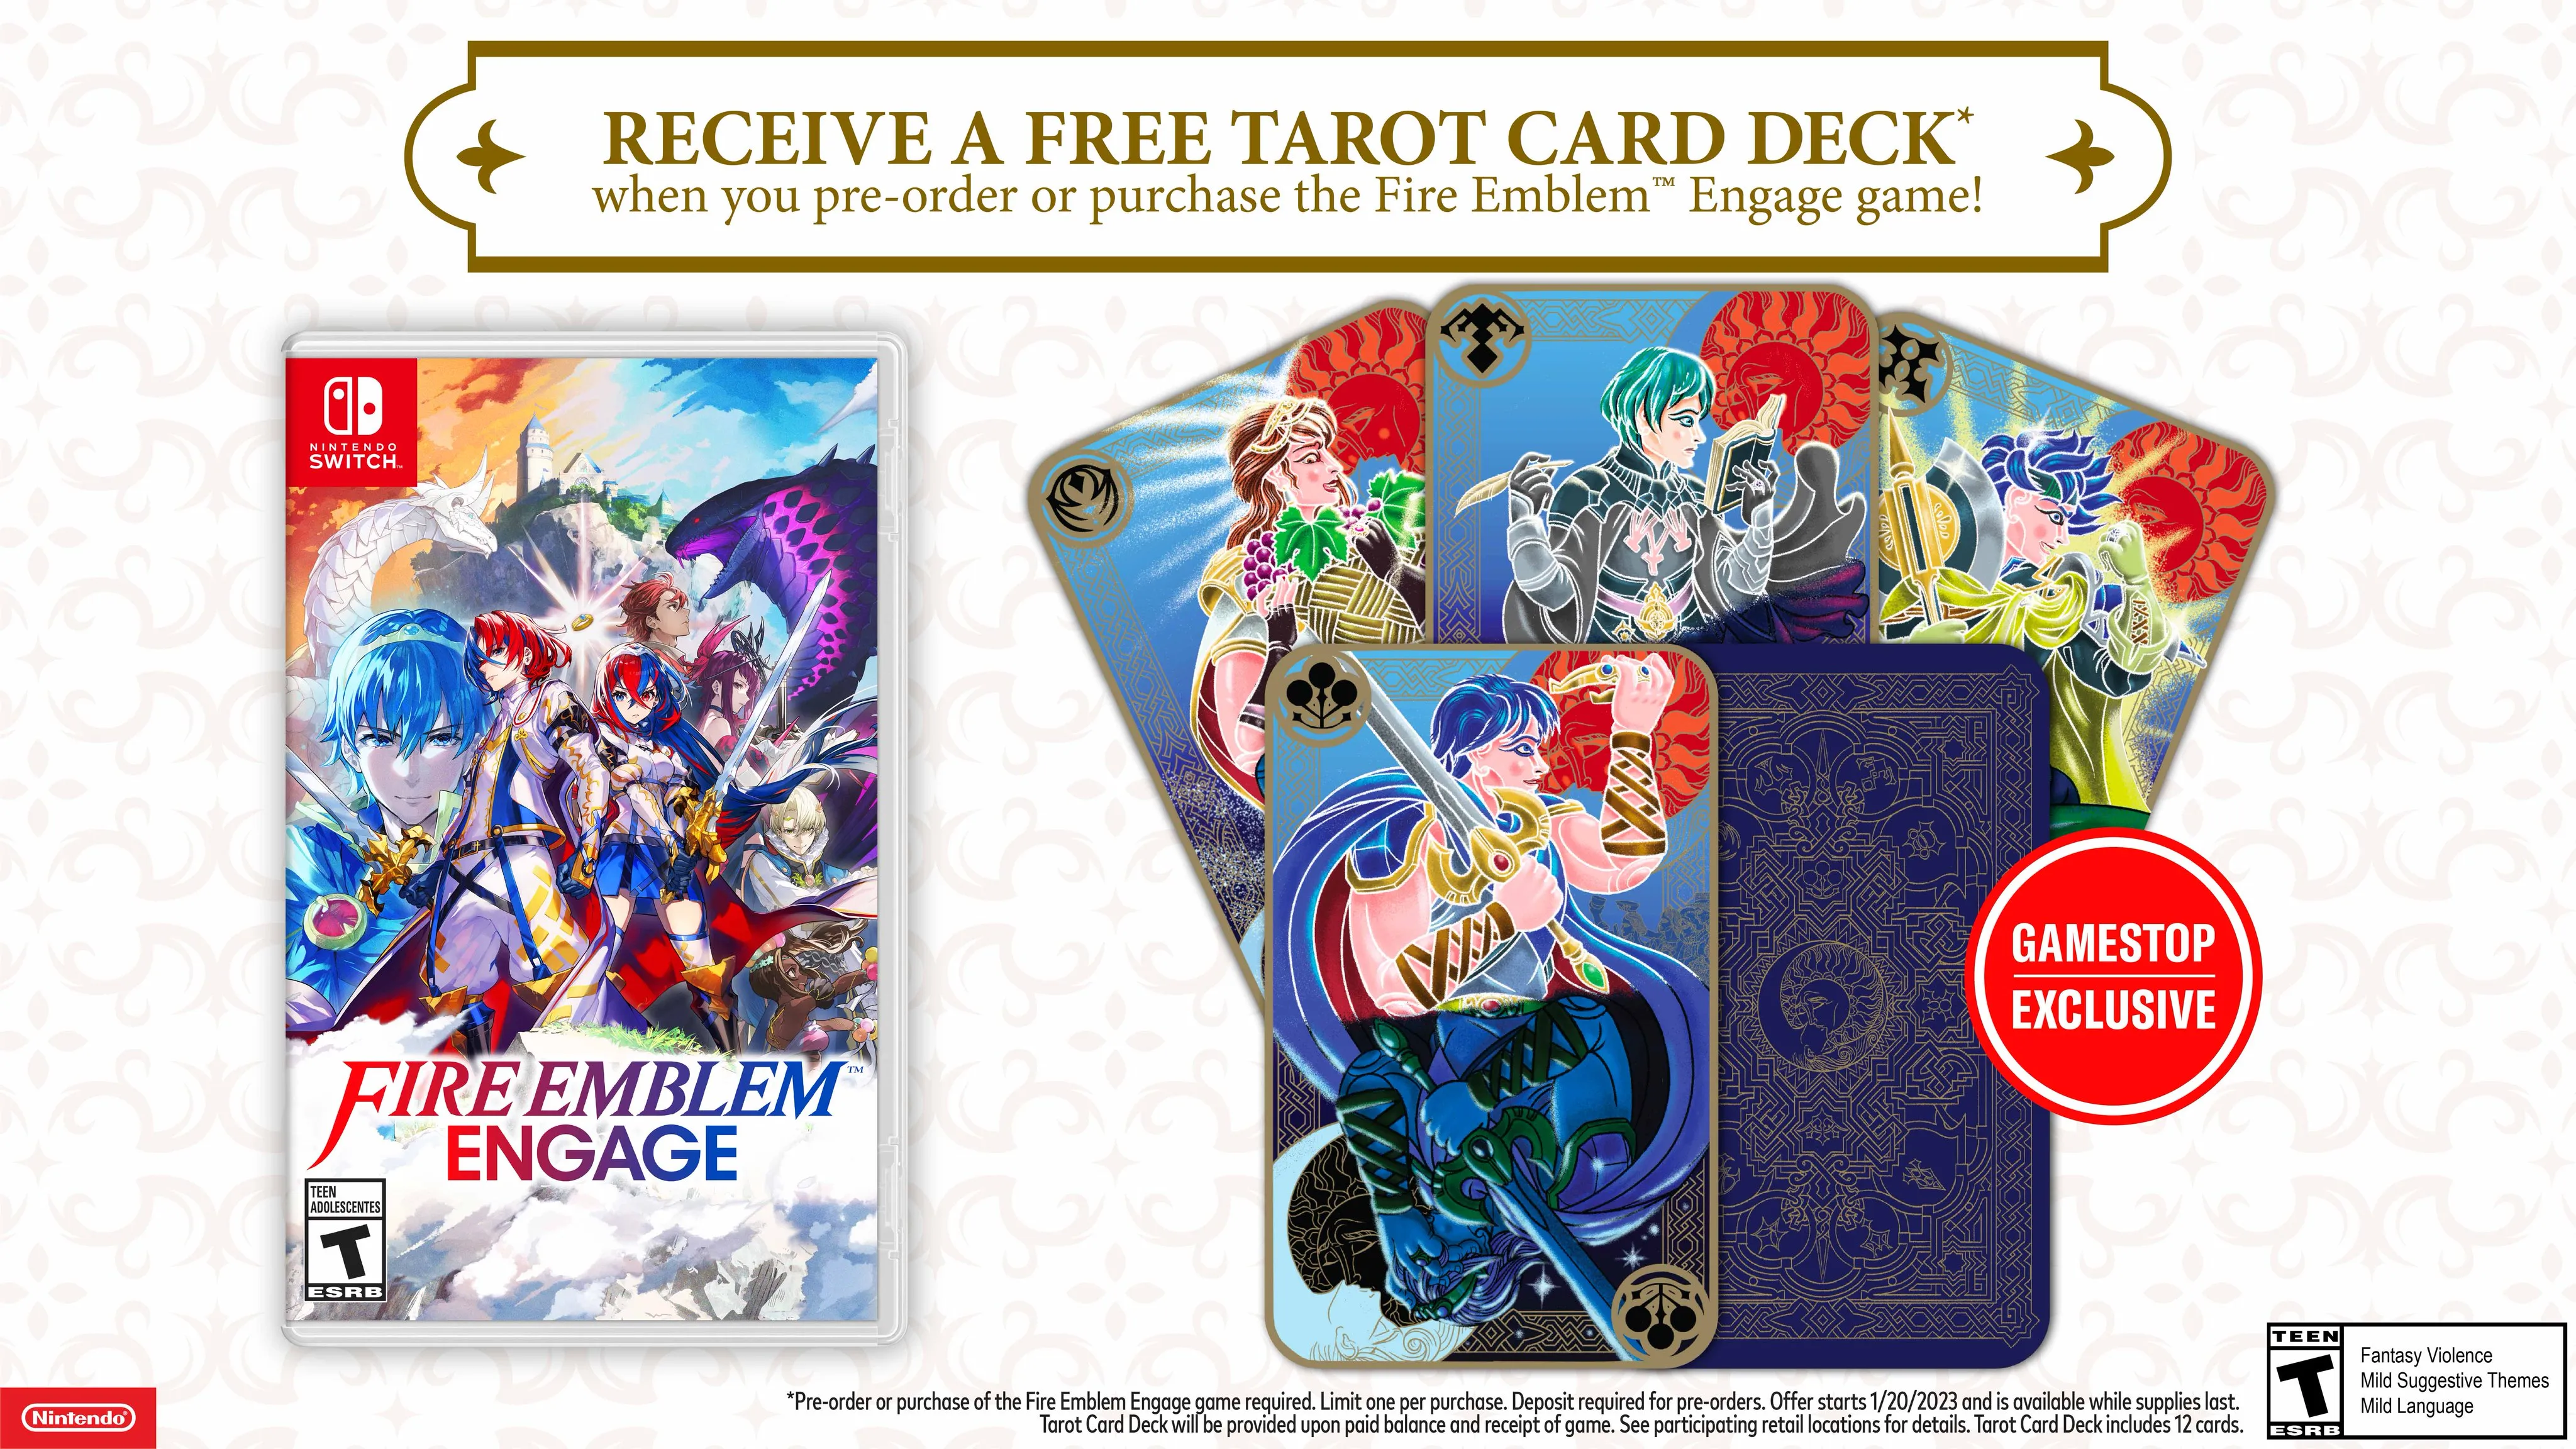 The Fire Emblem Engage pre-order bonus at GameStop is a set of tarot cards inspired by the game, but it isn't a full deck.